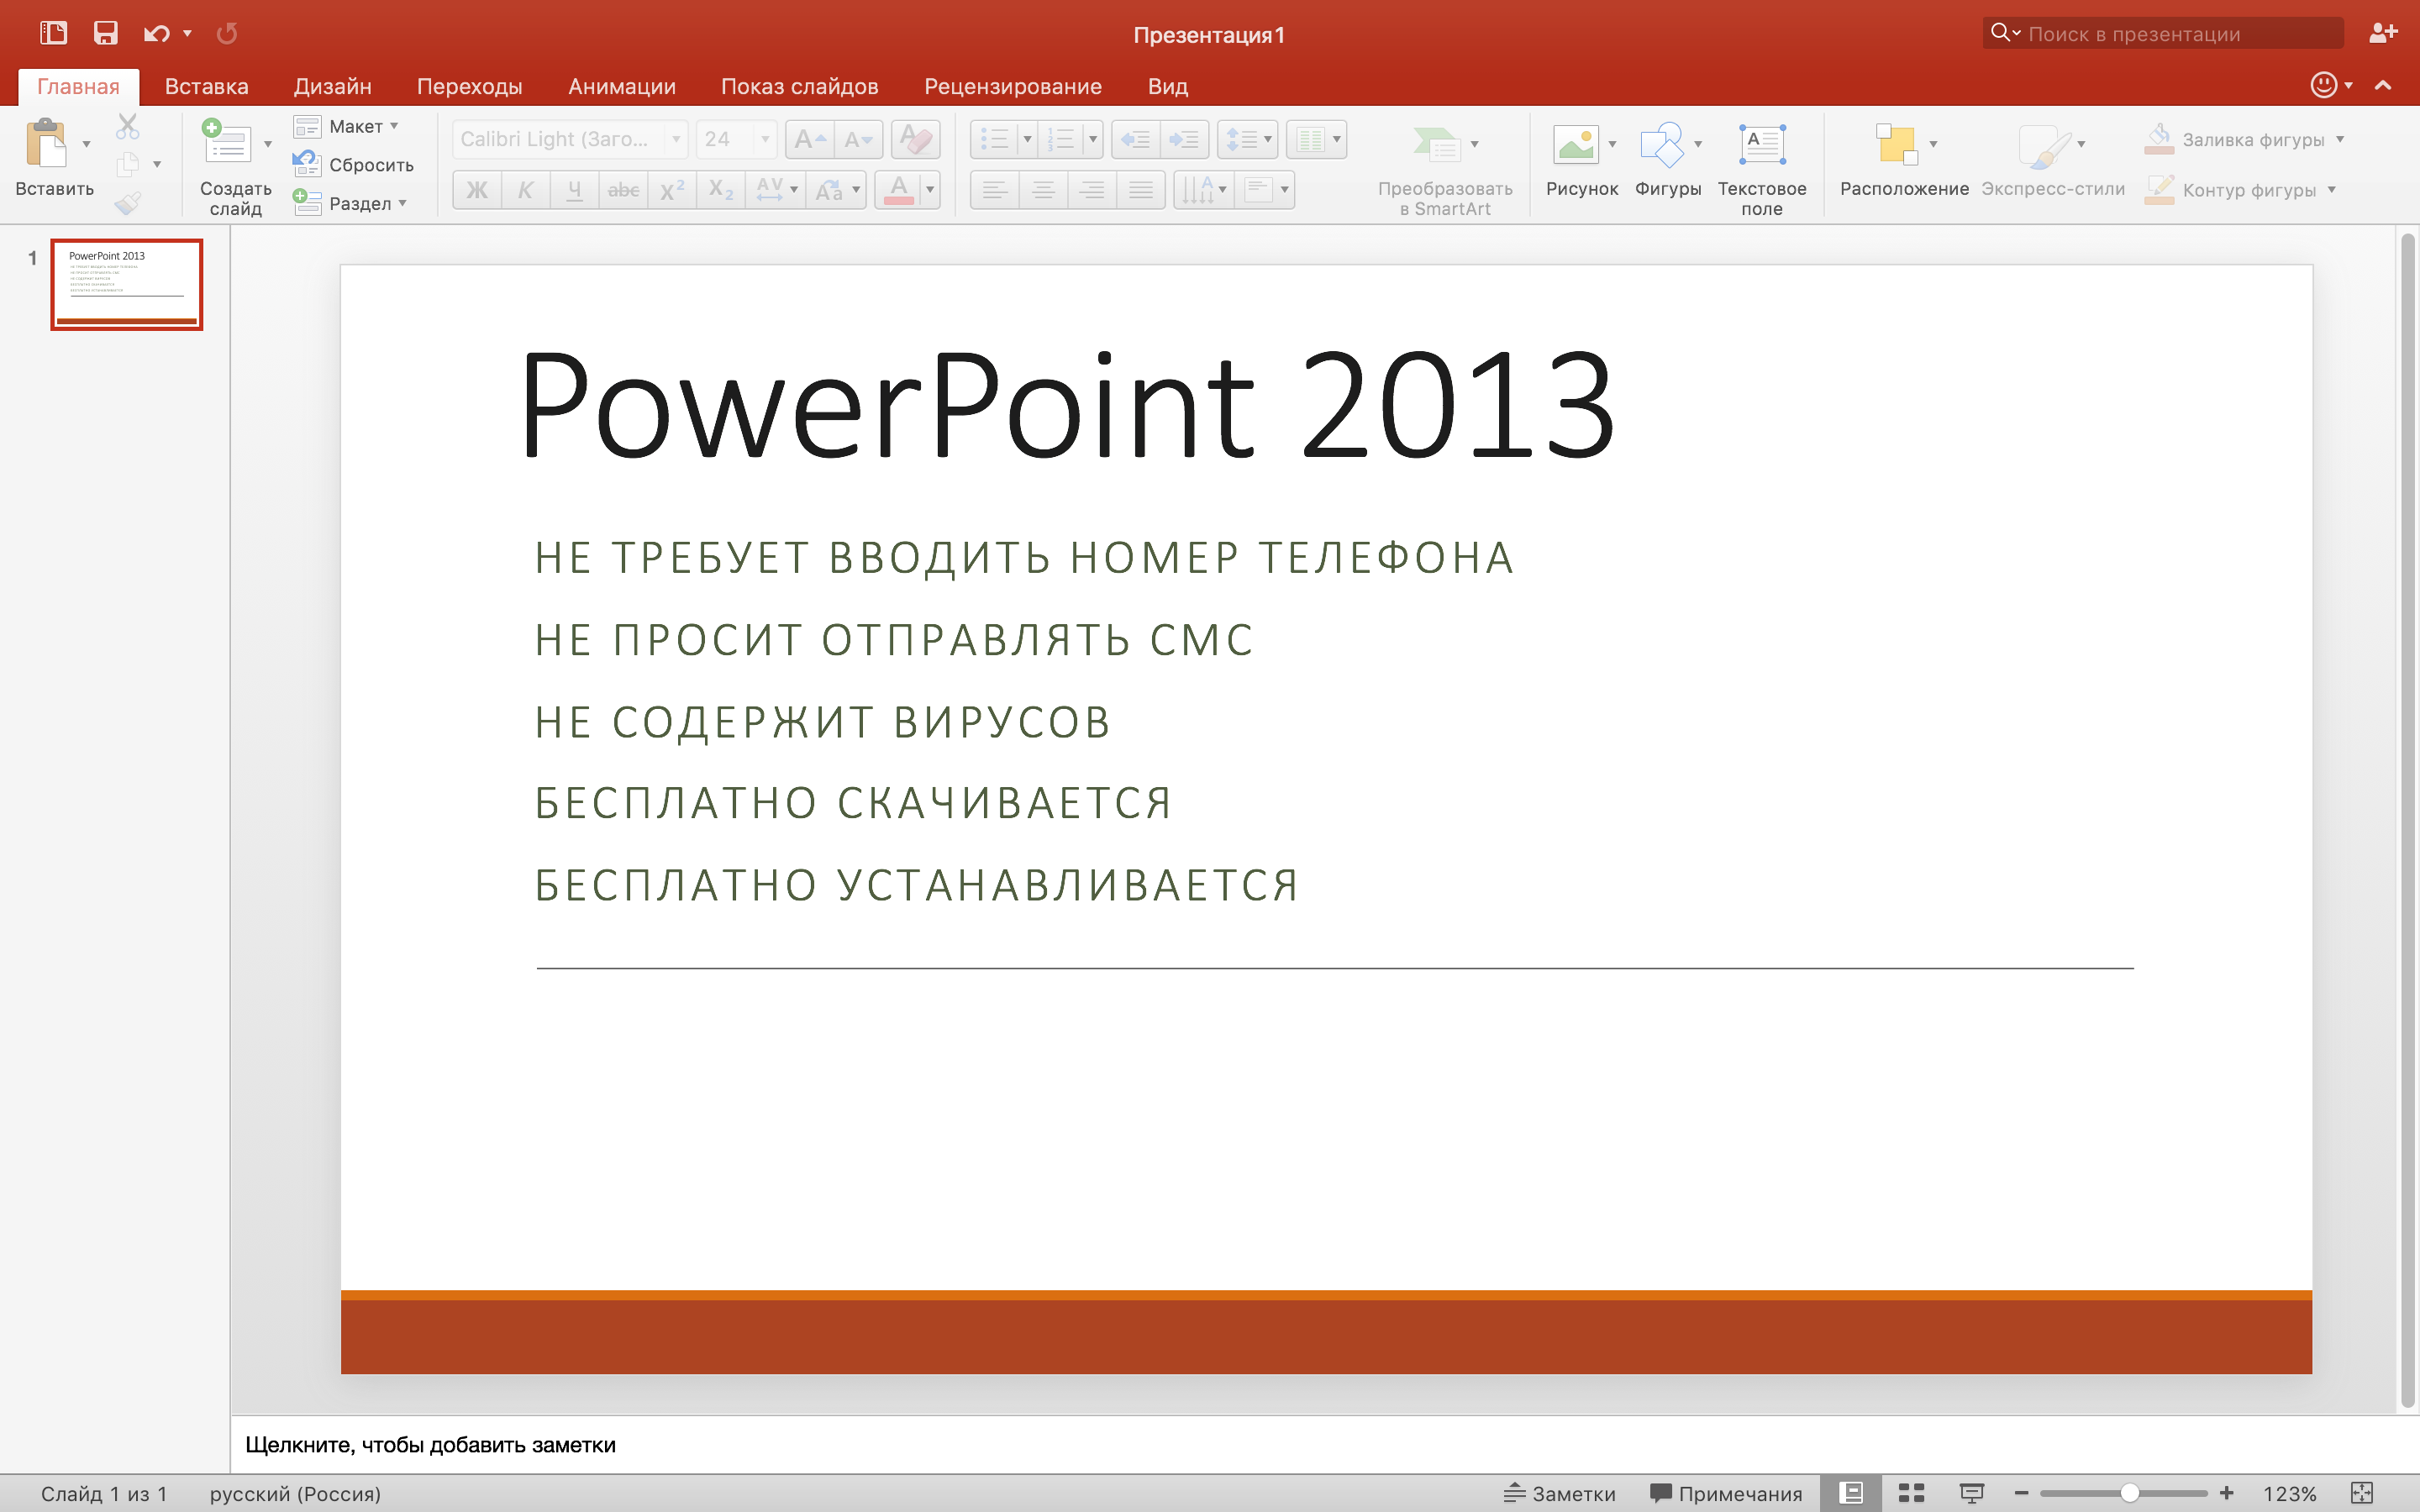 powerpoint 2013 download free for pc